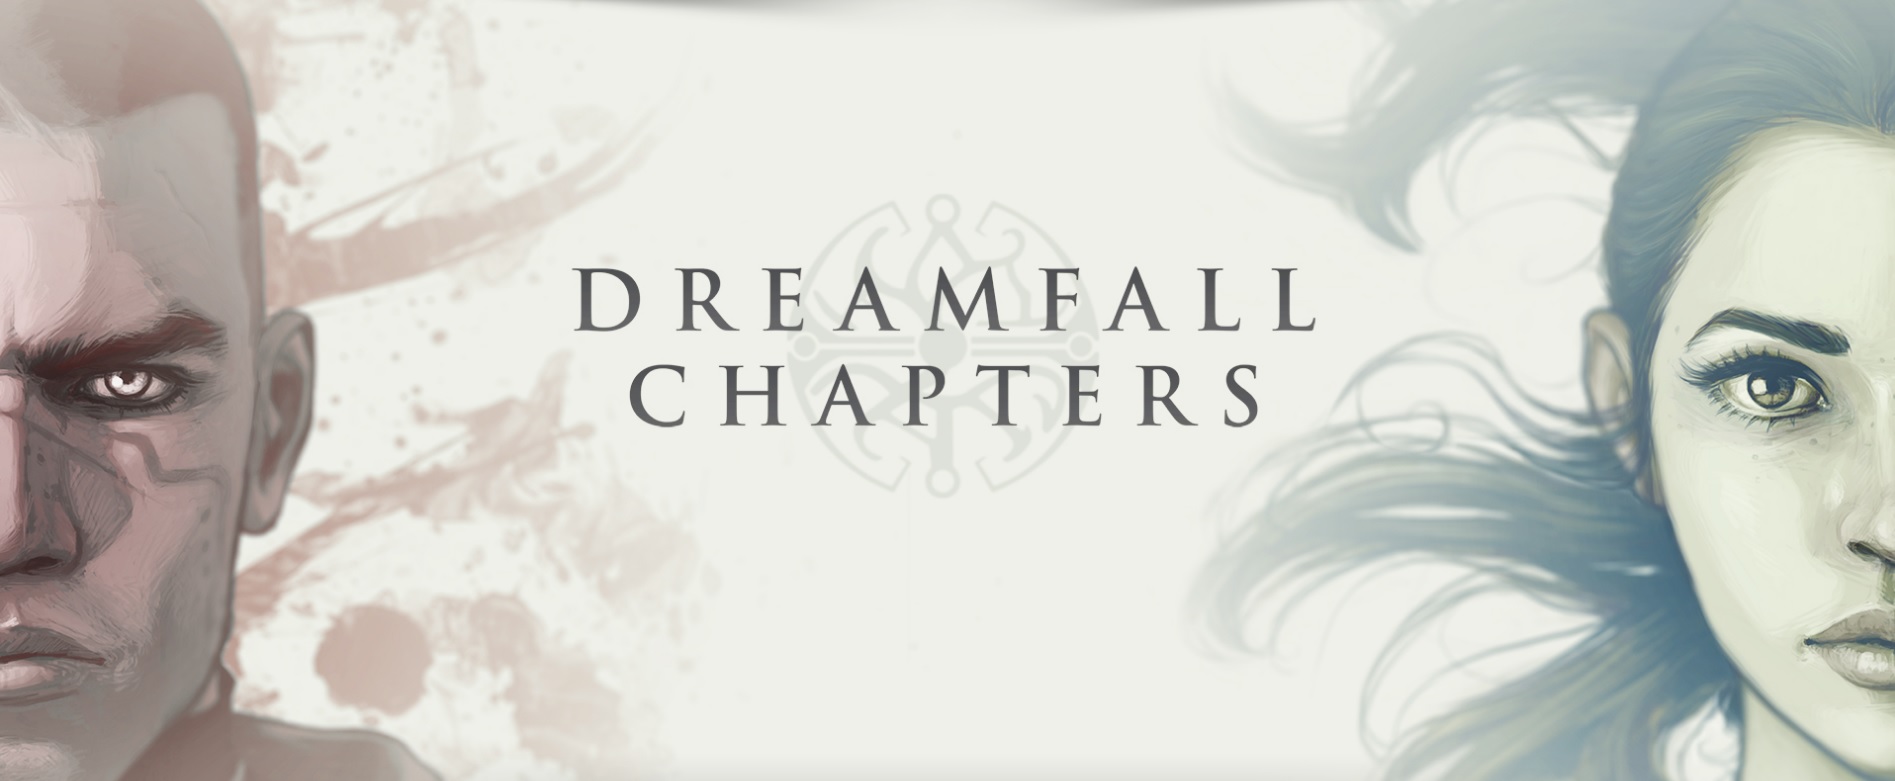 Dreamfall Chapters is a Kickstarter funded episodic adventure game that continues the adventures from The Longest Journey